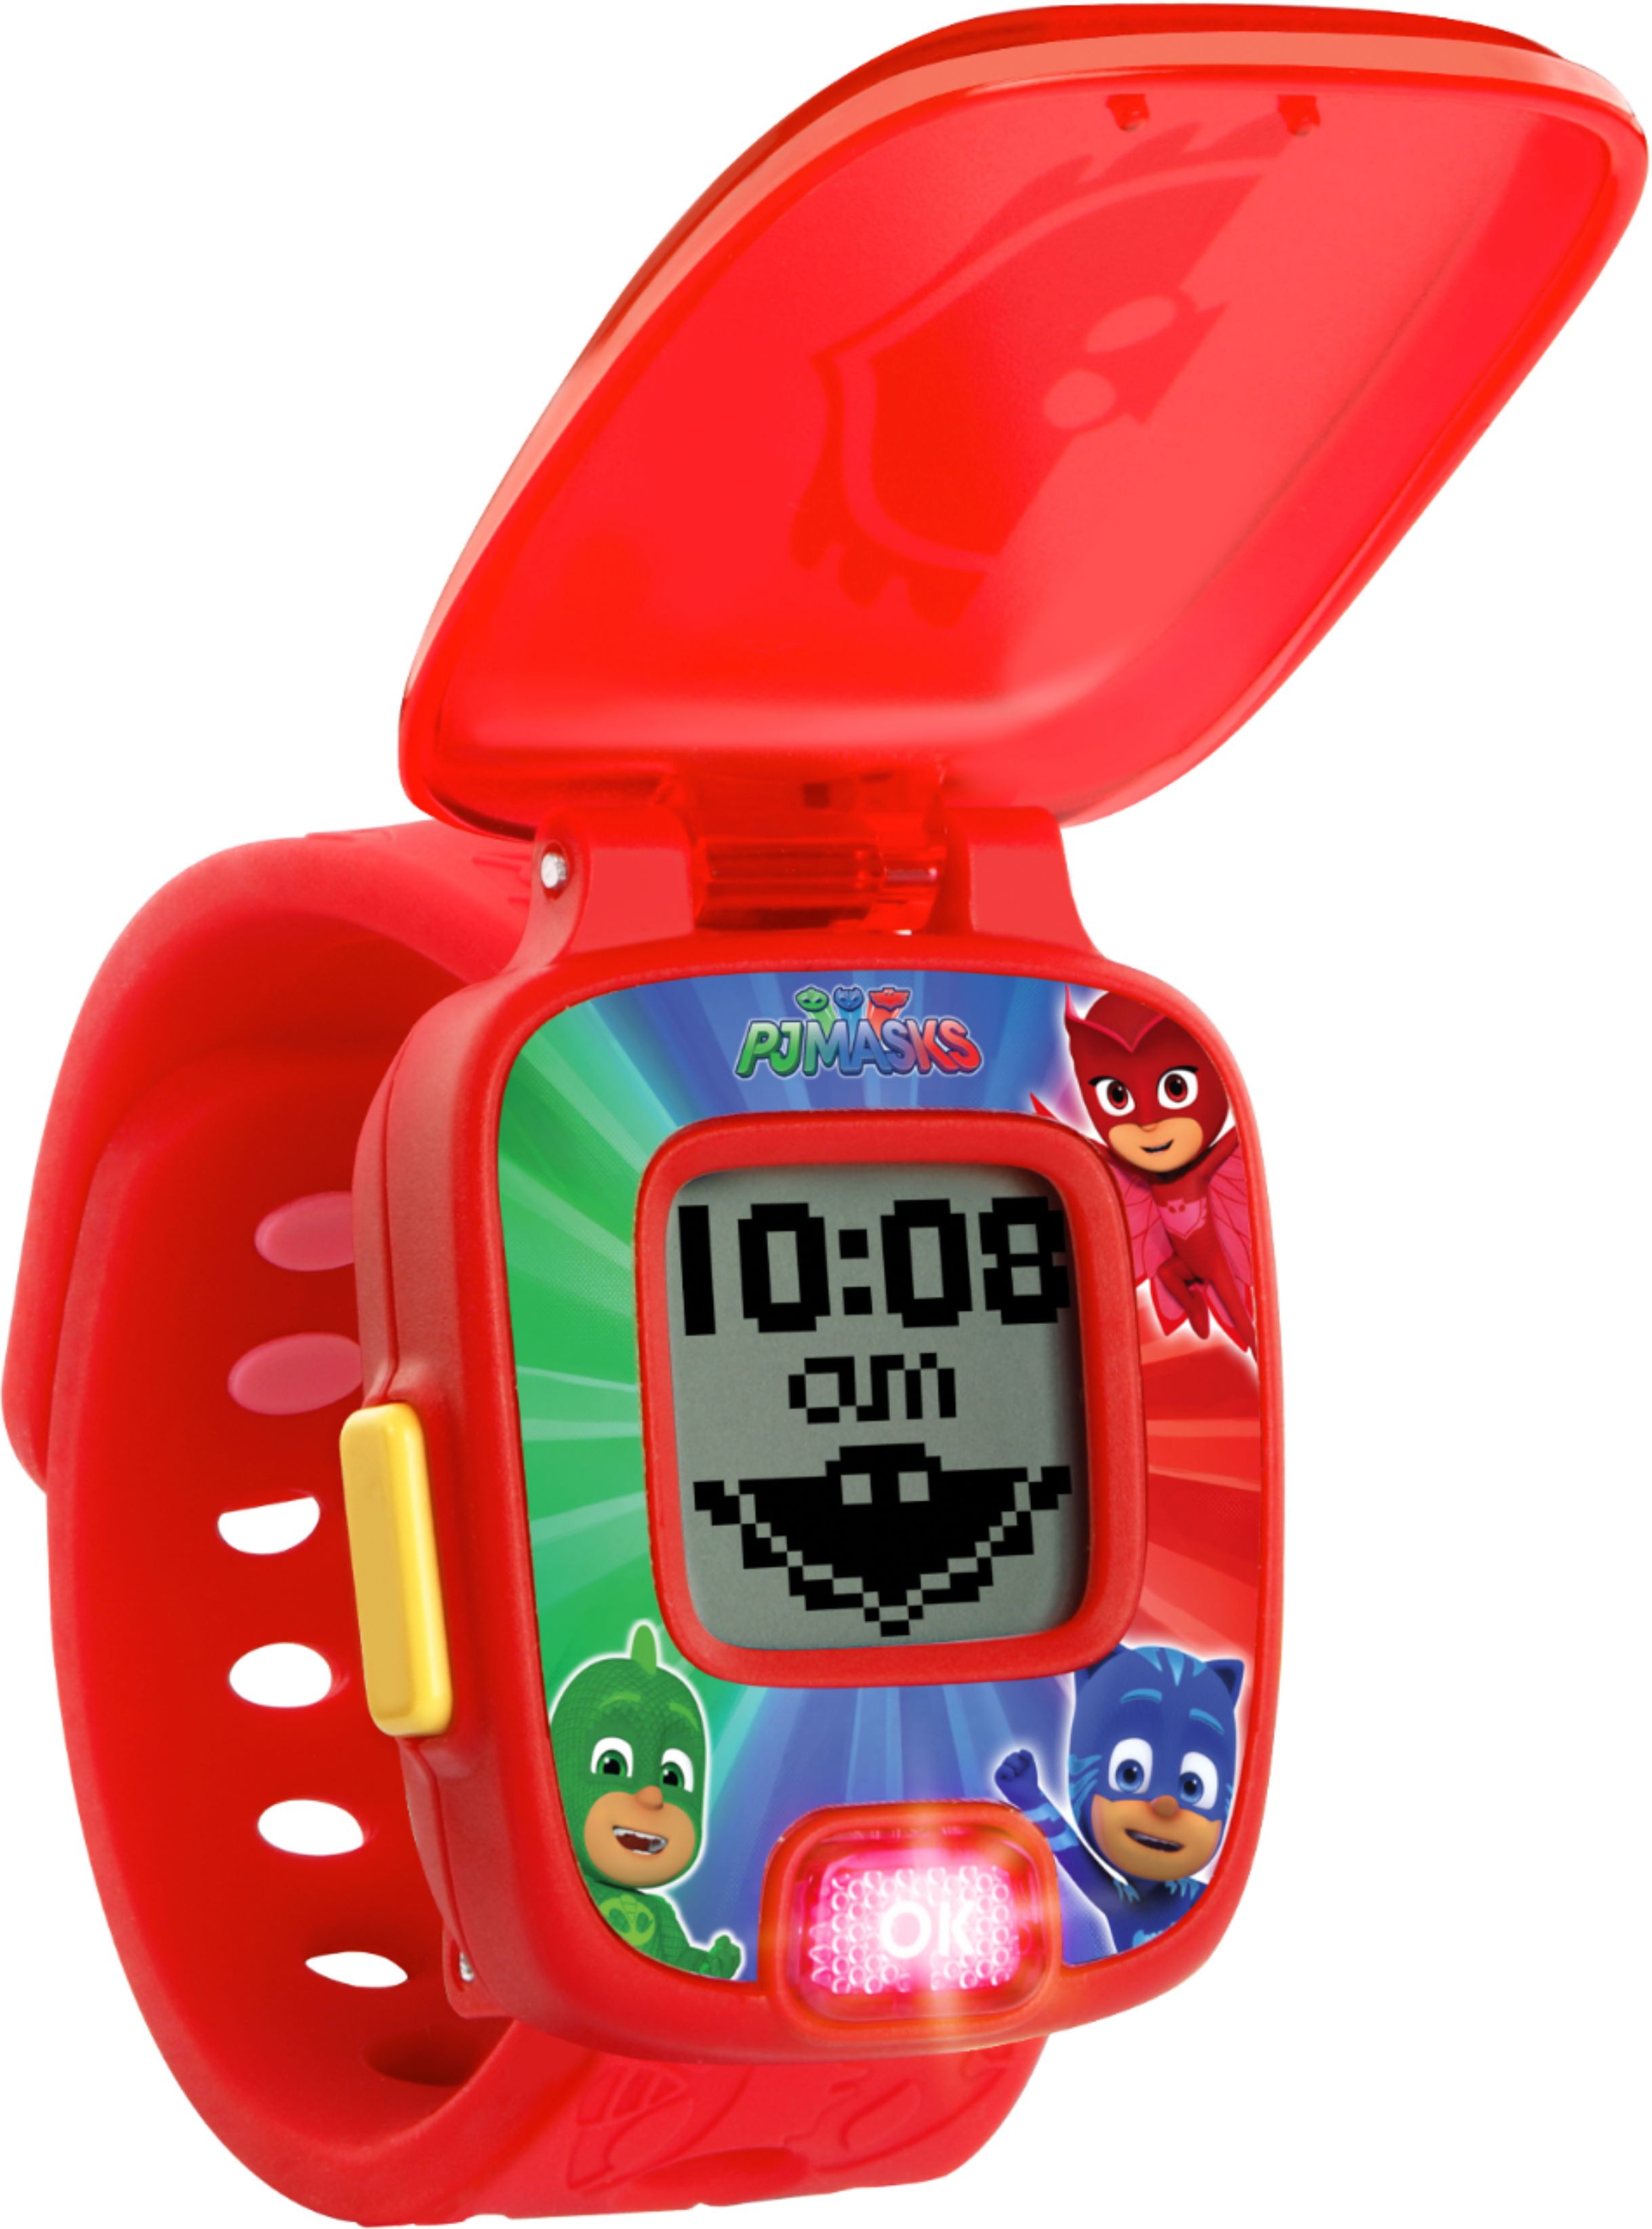 Angle View: VTech - PJ Masks Super Owlette Learning Watch - Red